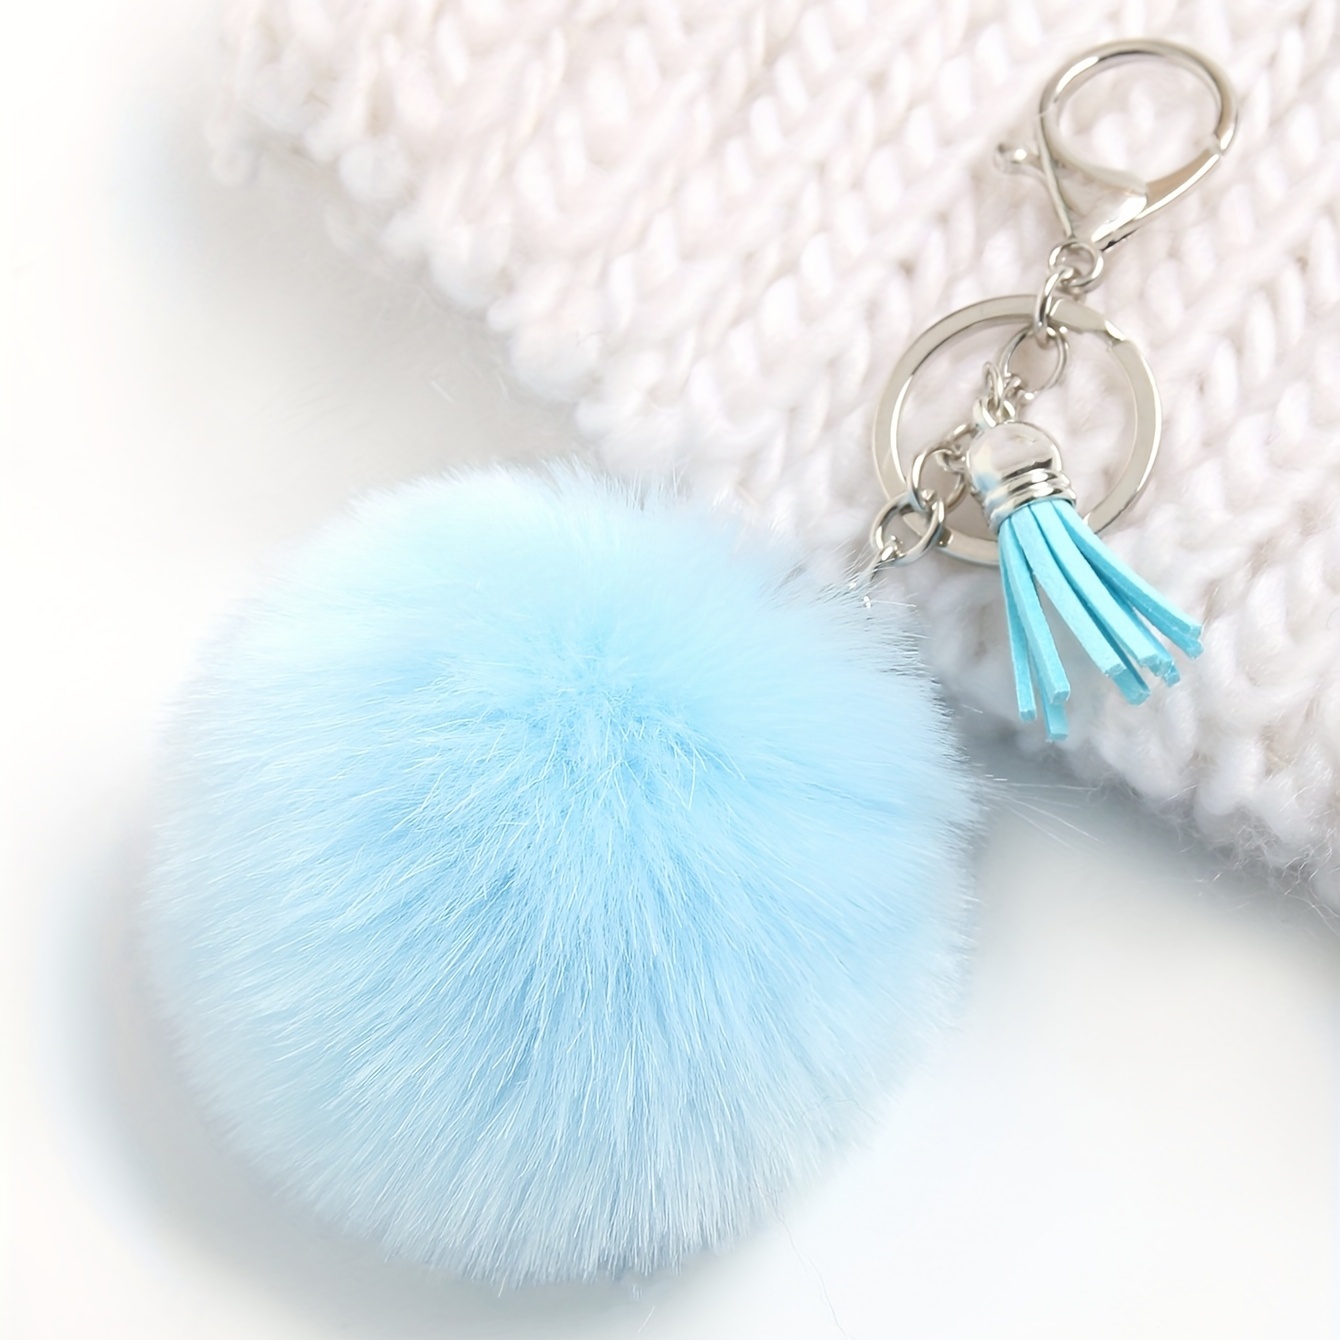 Rabbit Fur Ball Keychain With Tassel, Pink Diamond, Metal Pom Poms Plush  Car Keyring Holder For Women And Girls Fashionable Bag Charm Accessory From  Yambags, $2.56